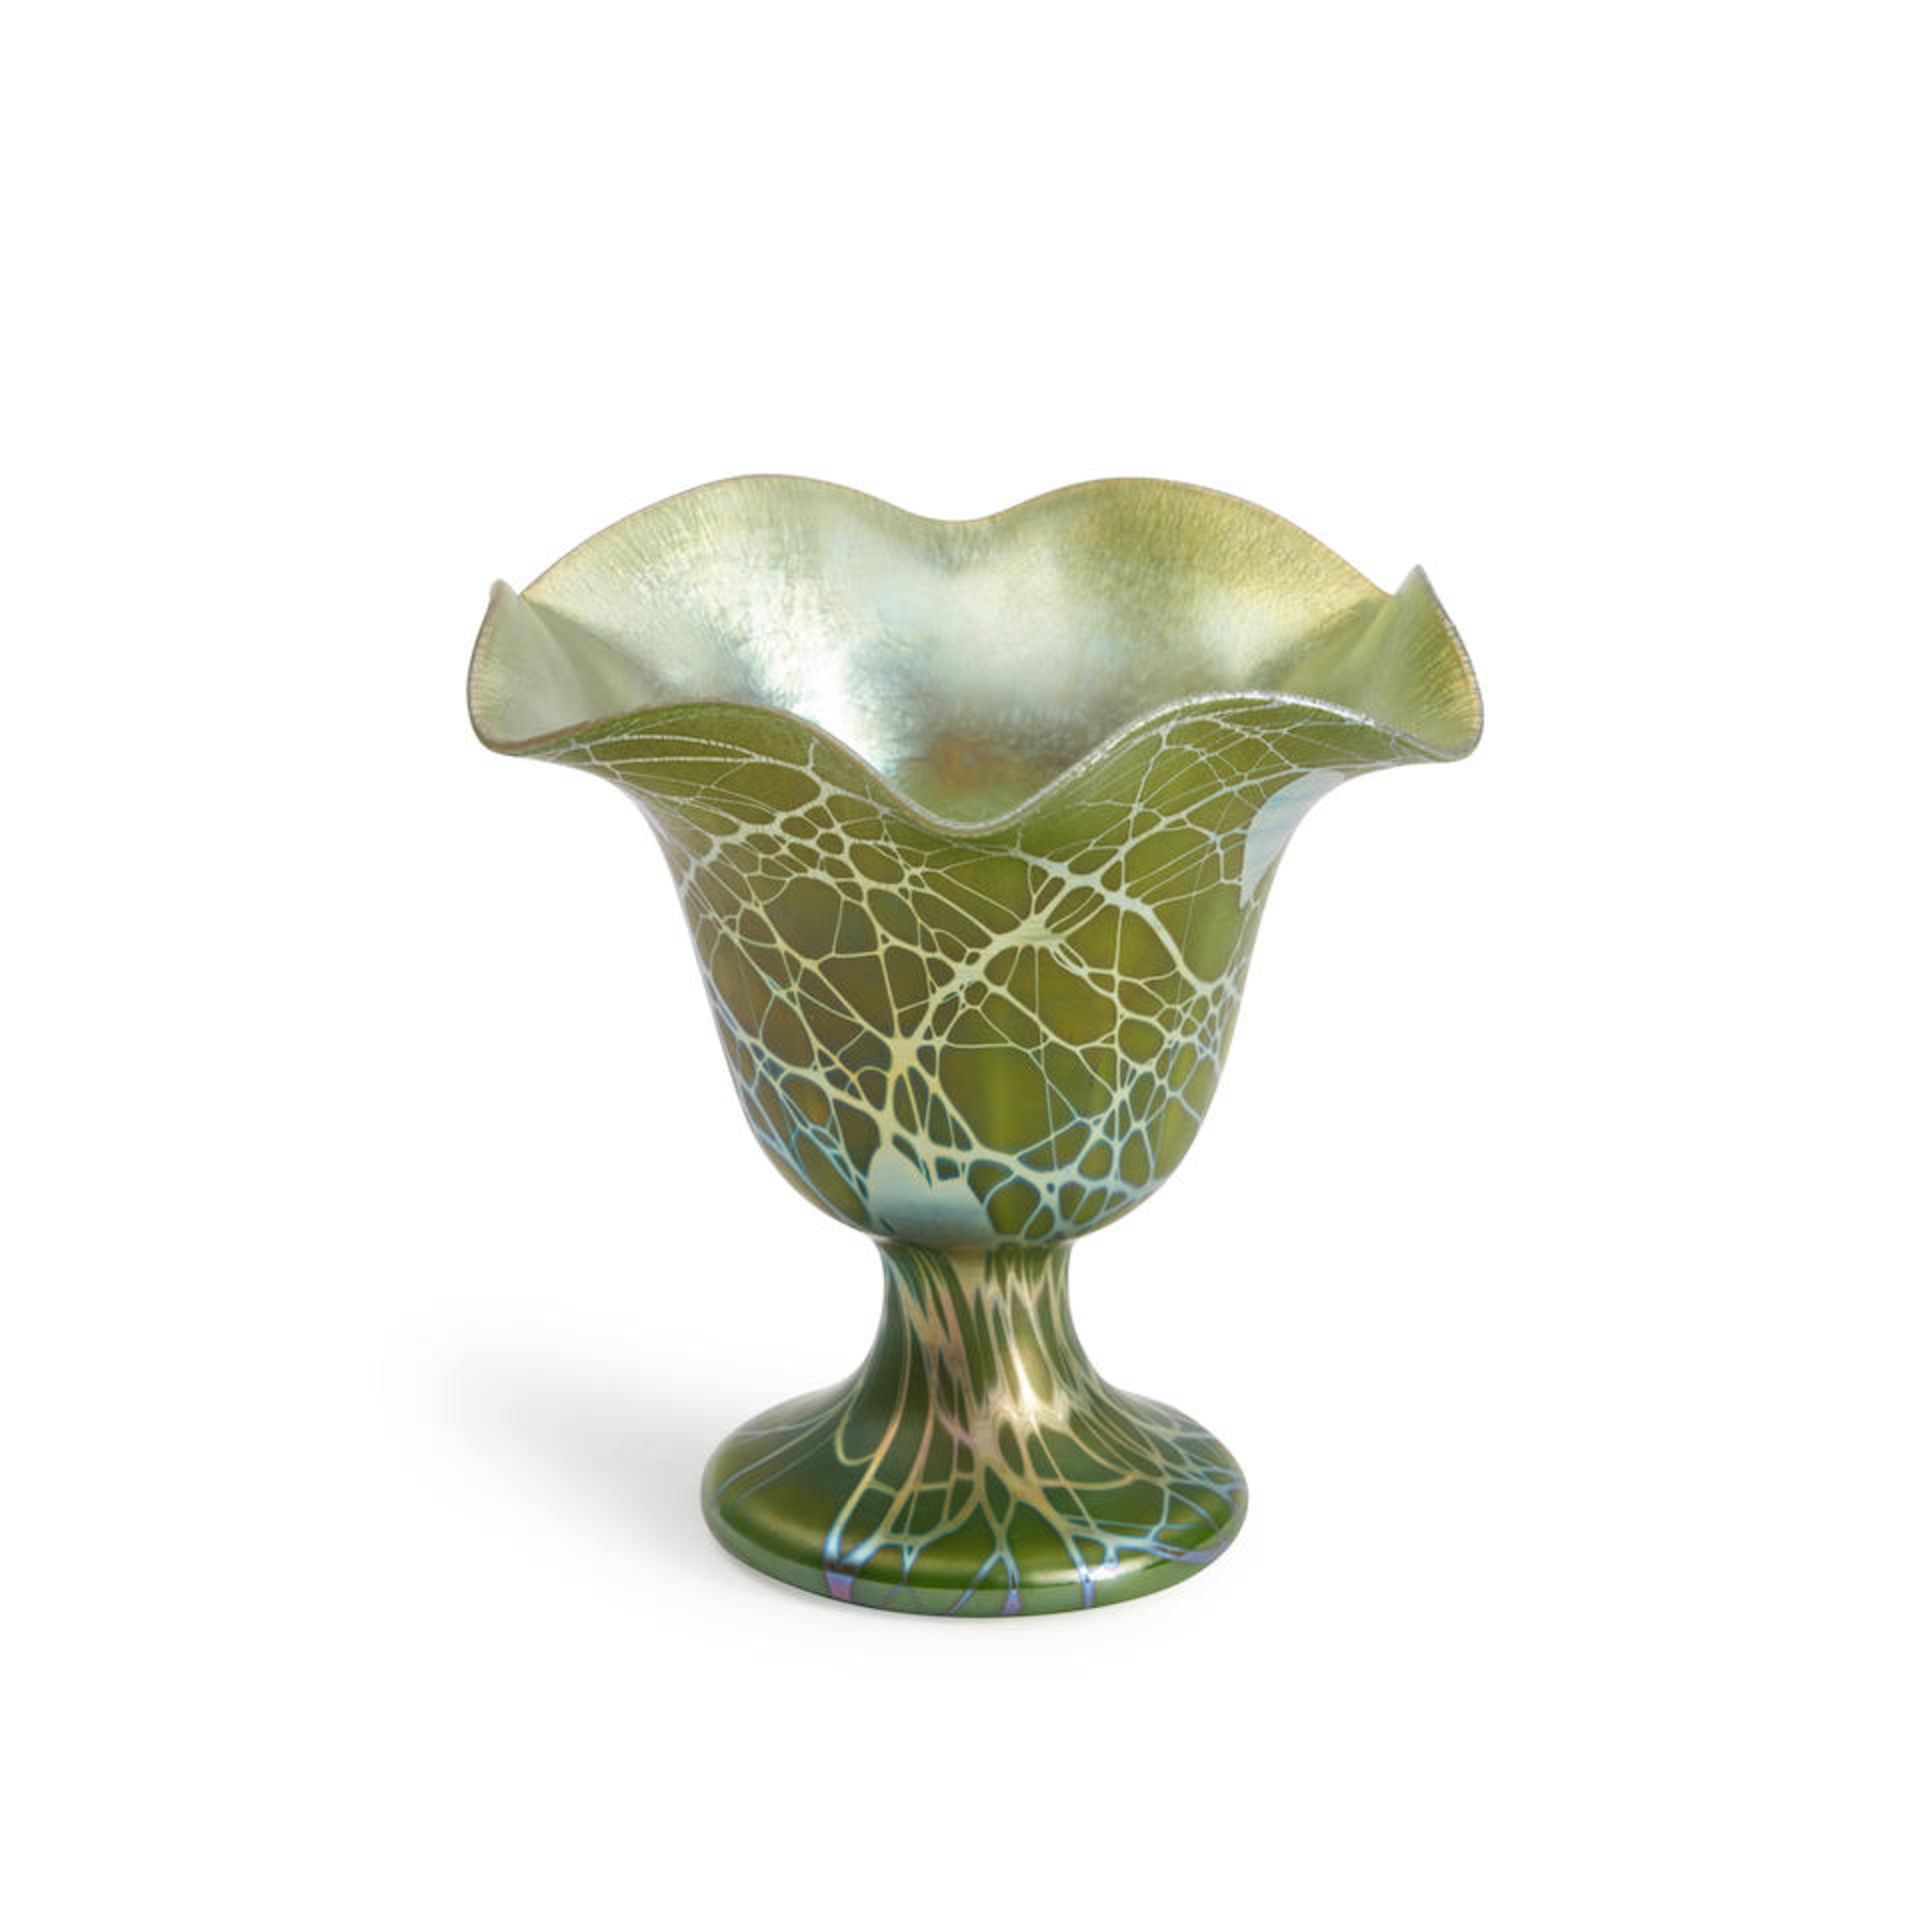 STEUBEN 'HEARTS AND VINE' GREEN AURENE GLASS VASE, Corning, New York, early 20th century, incise...